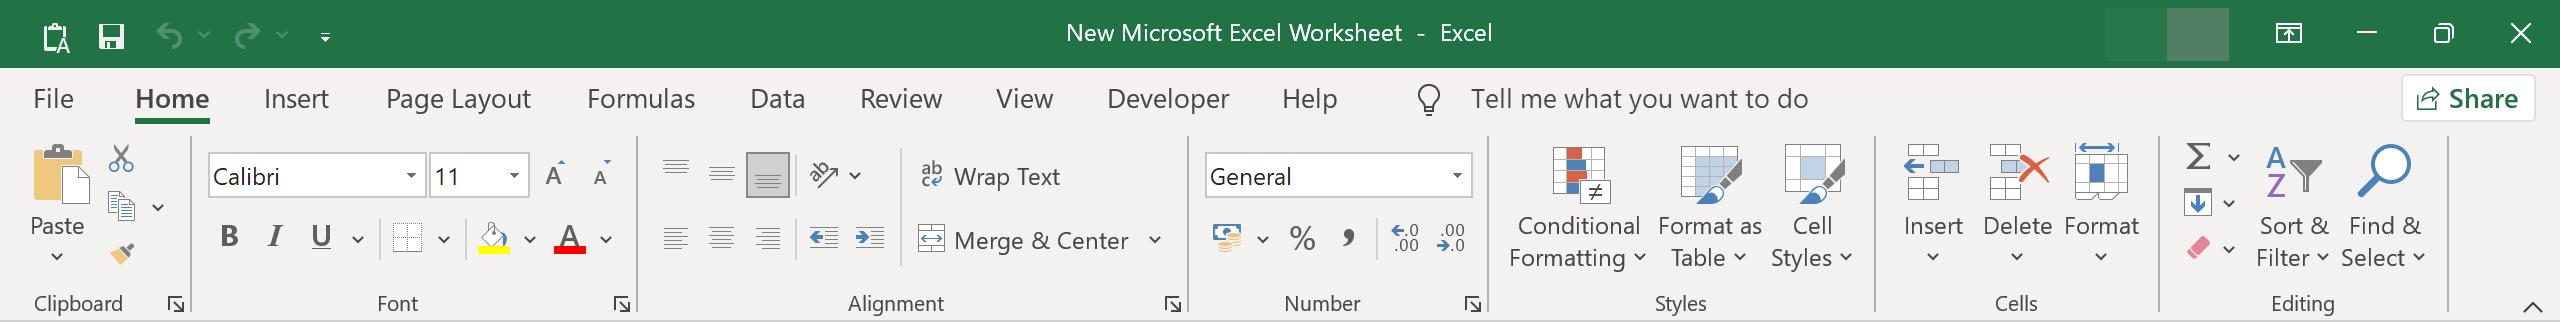 Go to the File Tab of Excel